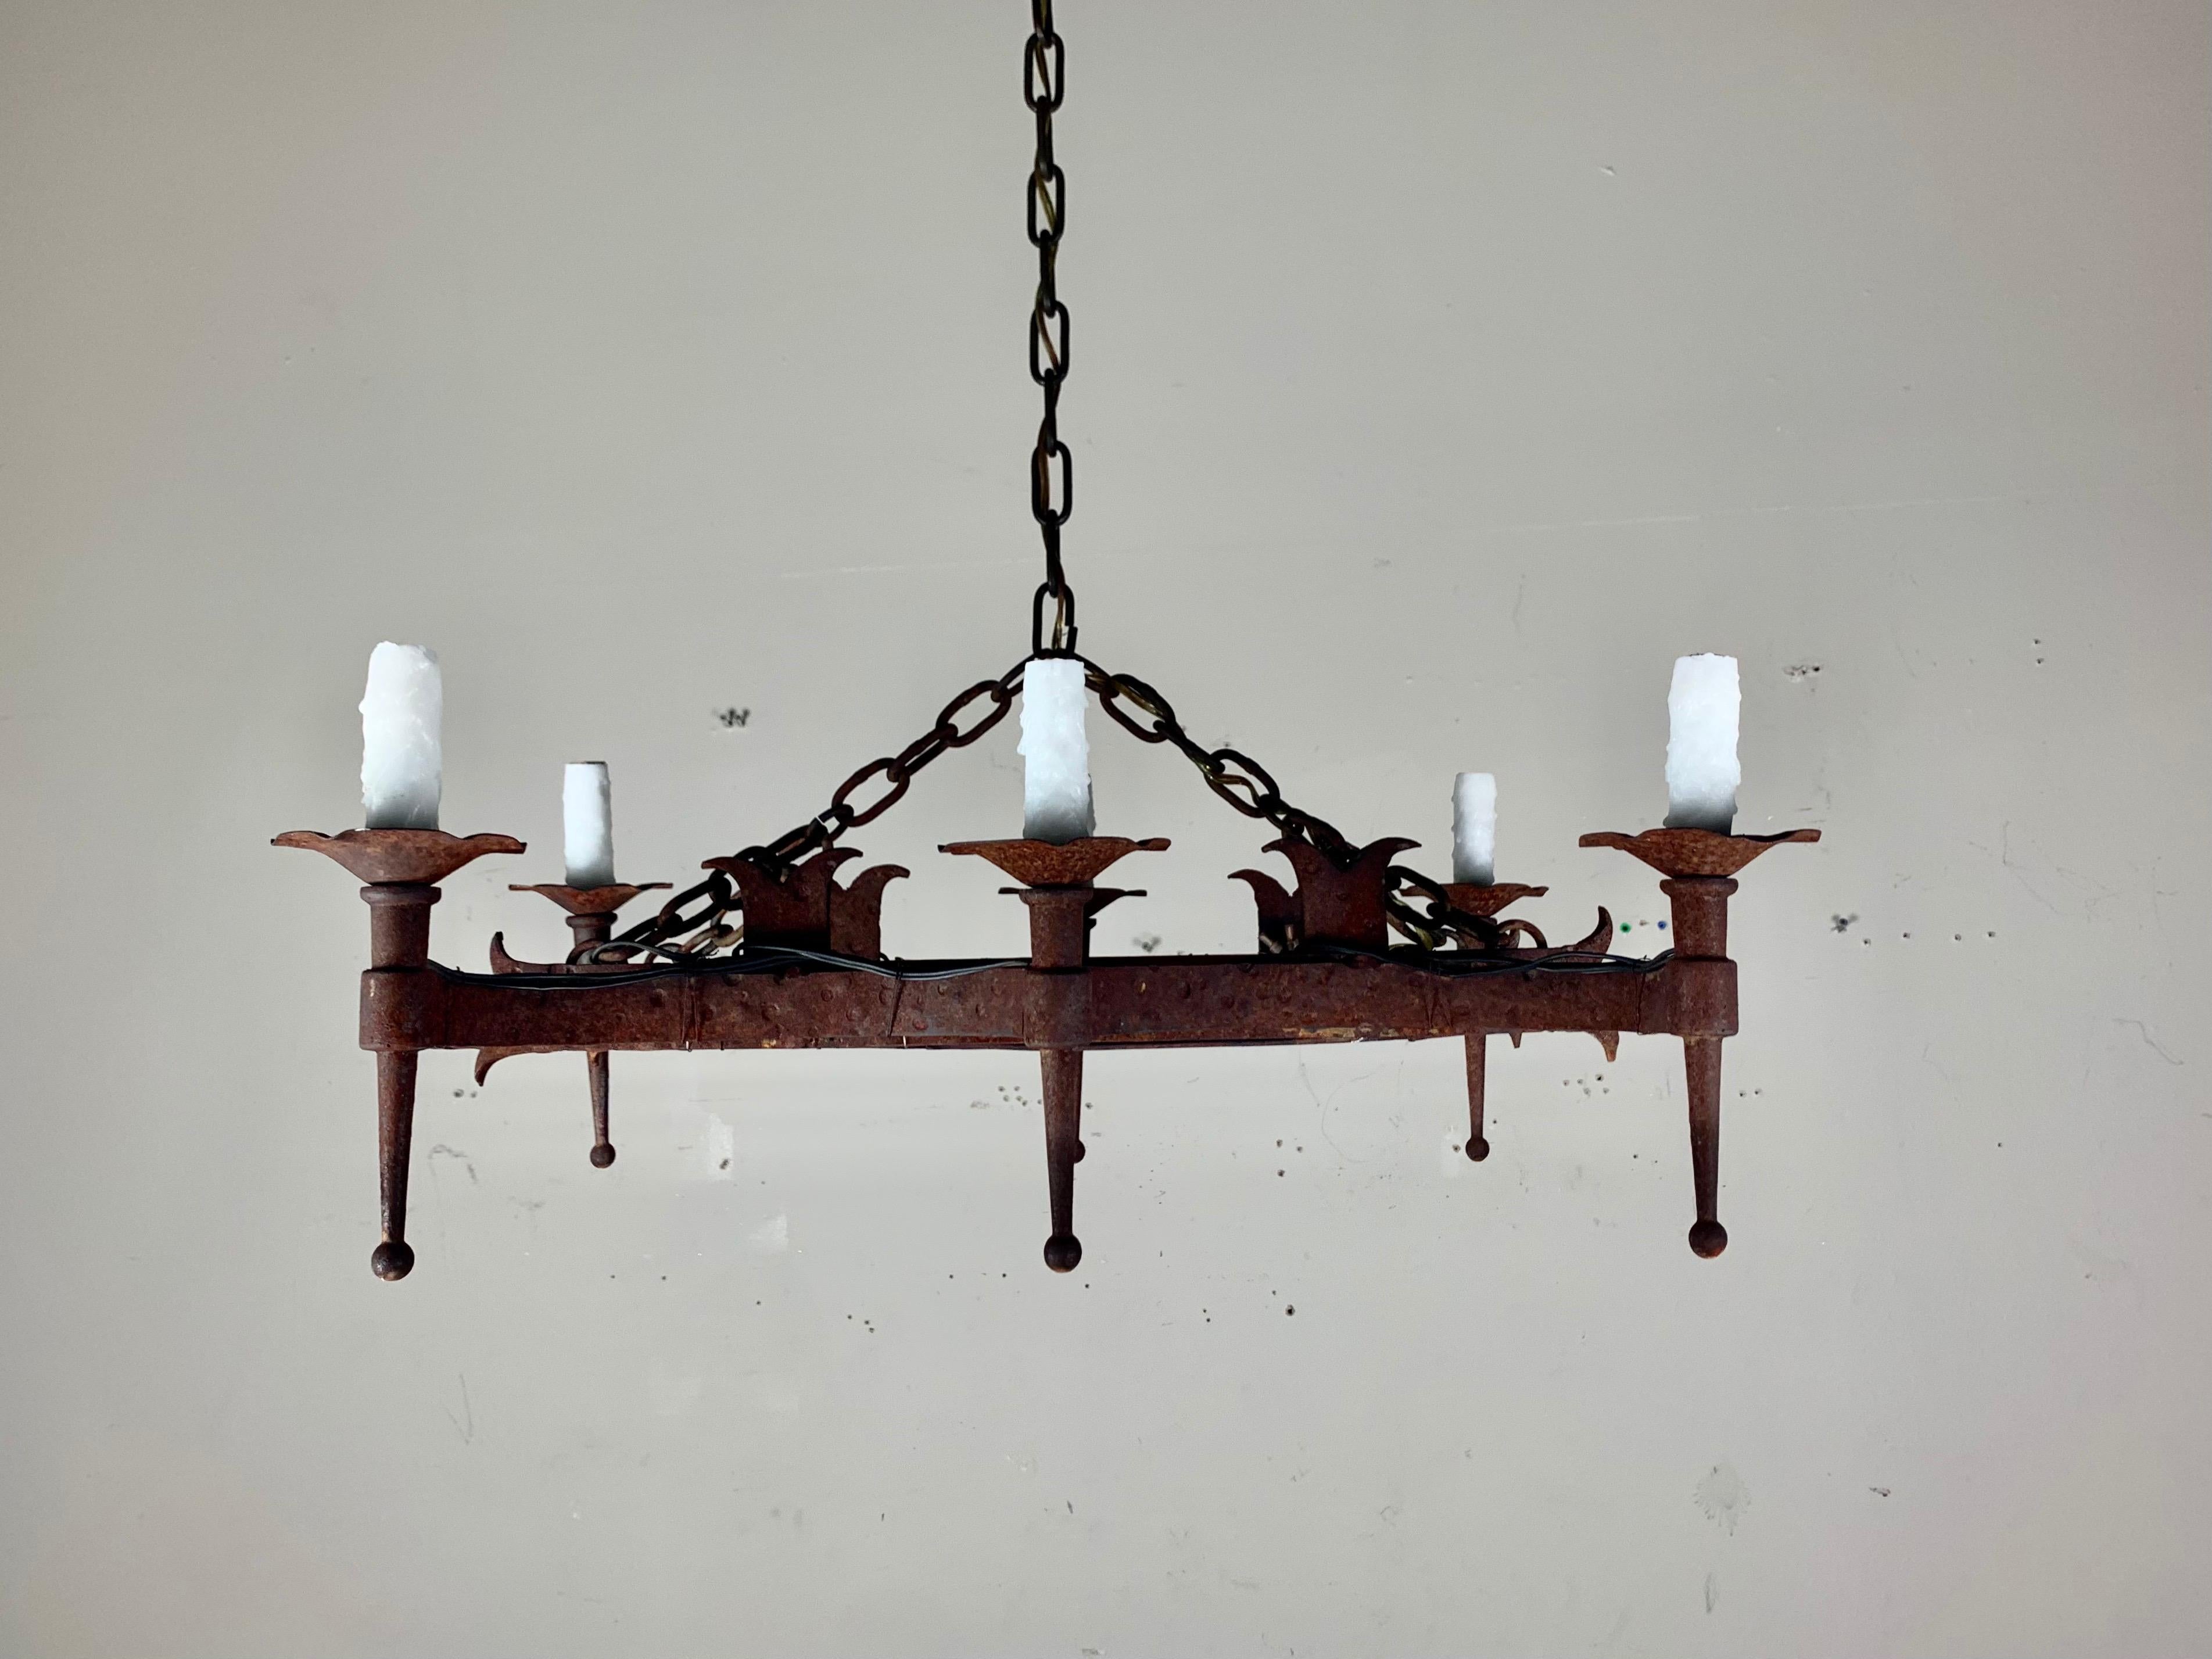 Spanish six light wrought iron chandelier. The fixture is newly rewired with drip wax candle covers. Chain & canopy included.